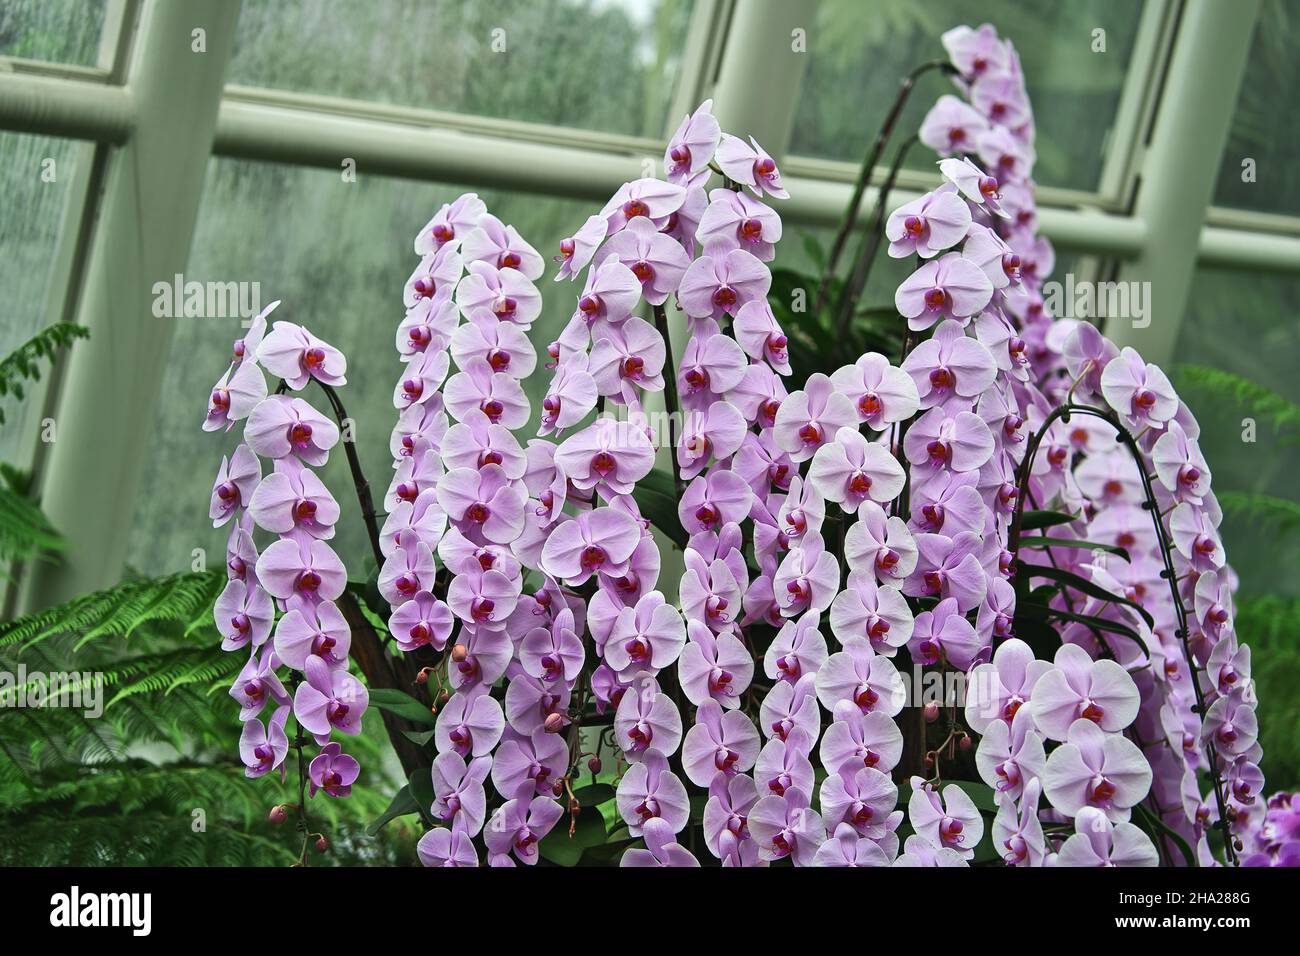 Botanic Garden at Singapore containing exotic orchids and flowers. Different types of orchids that live in tropical country. Stock Photo